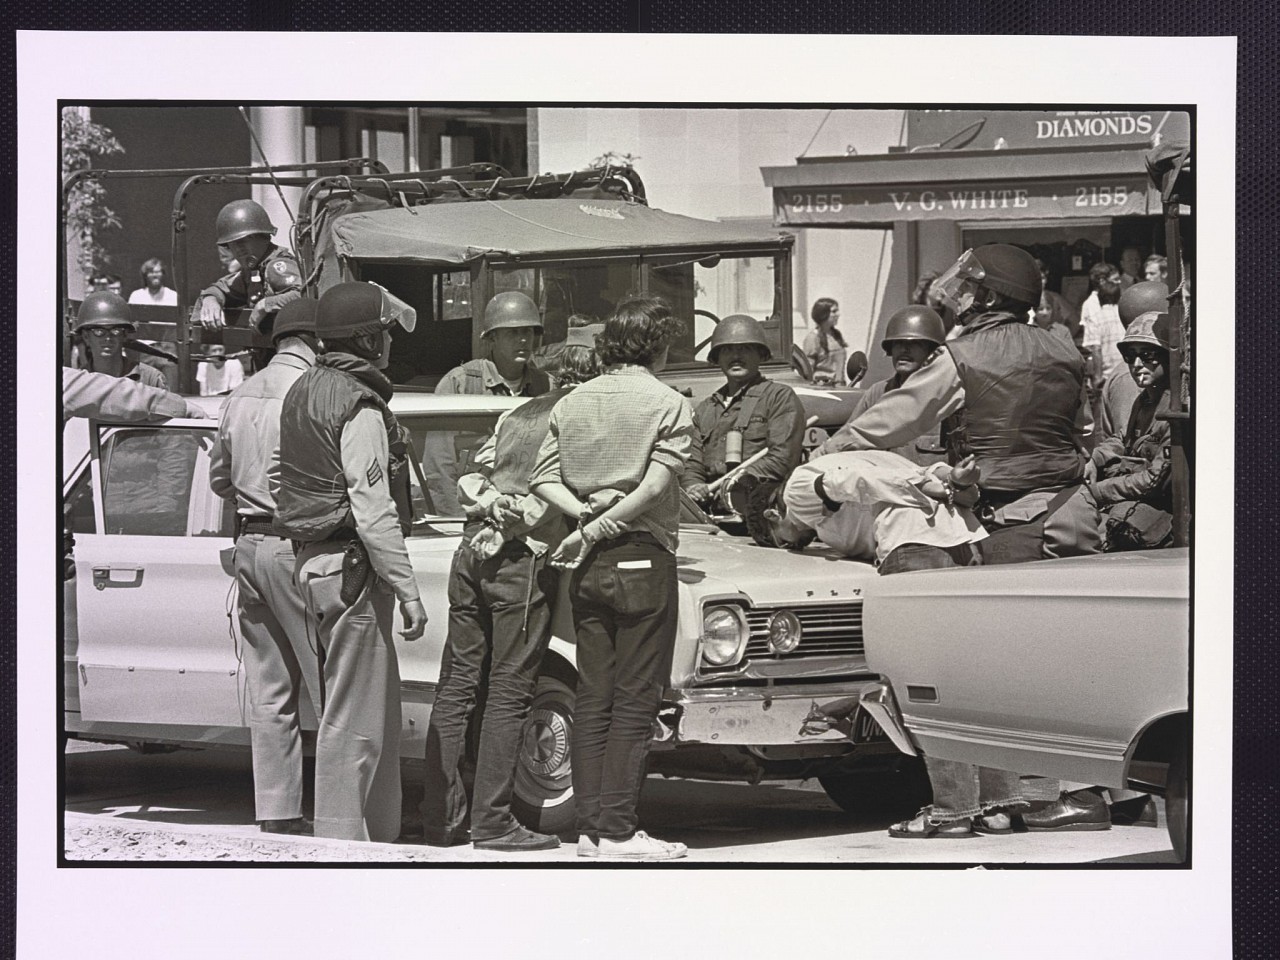 Danny LYON, Arrest of demonstrators, Berkeley, 1969
Later gelatin silver print, 11 x 14 in.
2016.07.007
ADDITIONAL INFORMATION: Illustrated: Danny Lyon, The Seventh Dog (New York, The Phaidon Press, 2014), p. 107
Credit Line: Lafayette College Art Collection, Easton, PA; Gift of Bennett ('79) and Meg Goodman